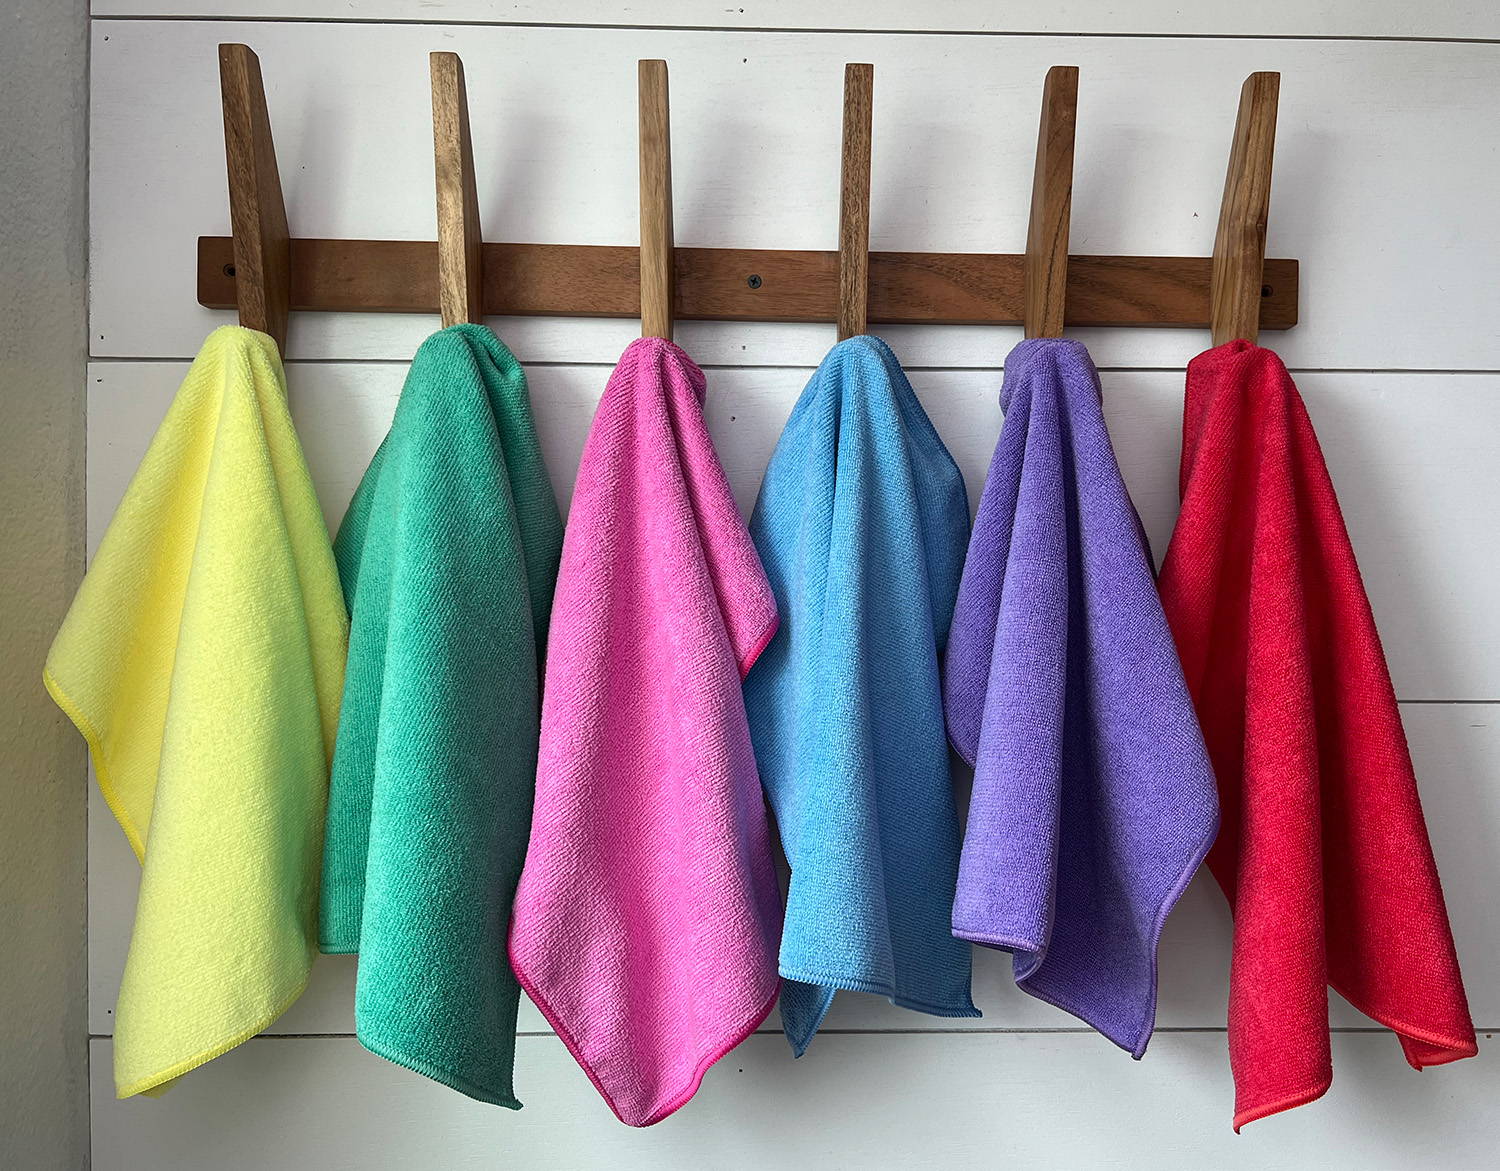 different colored microfiber towels hanging on rack